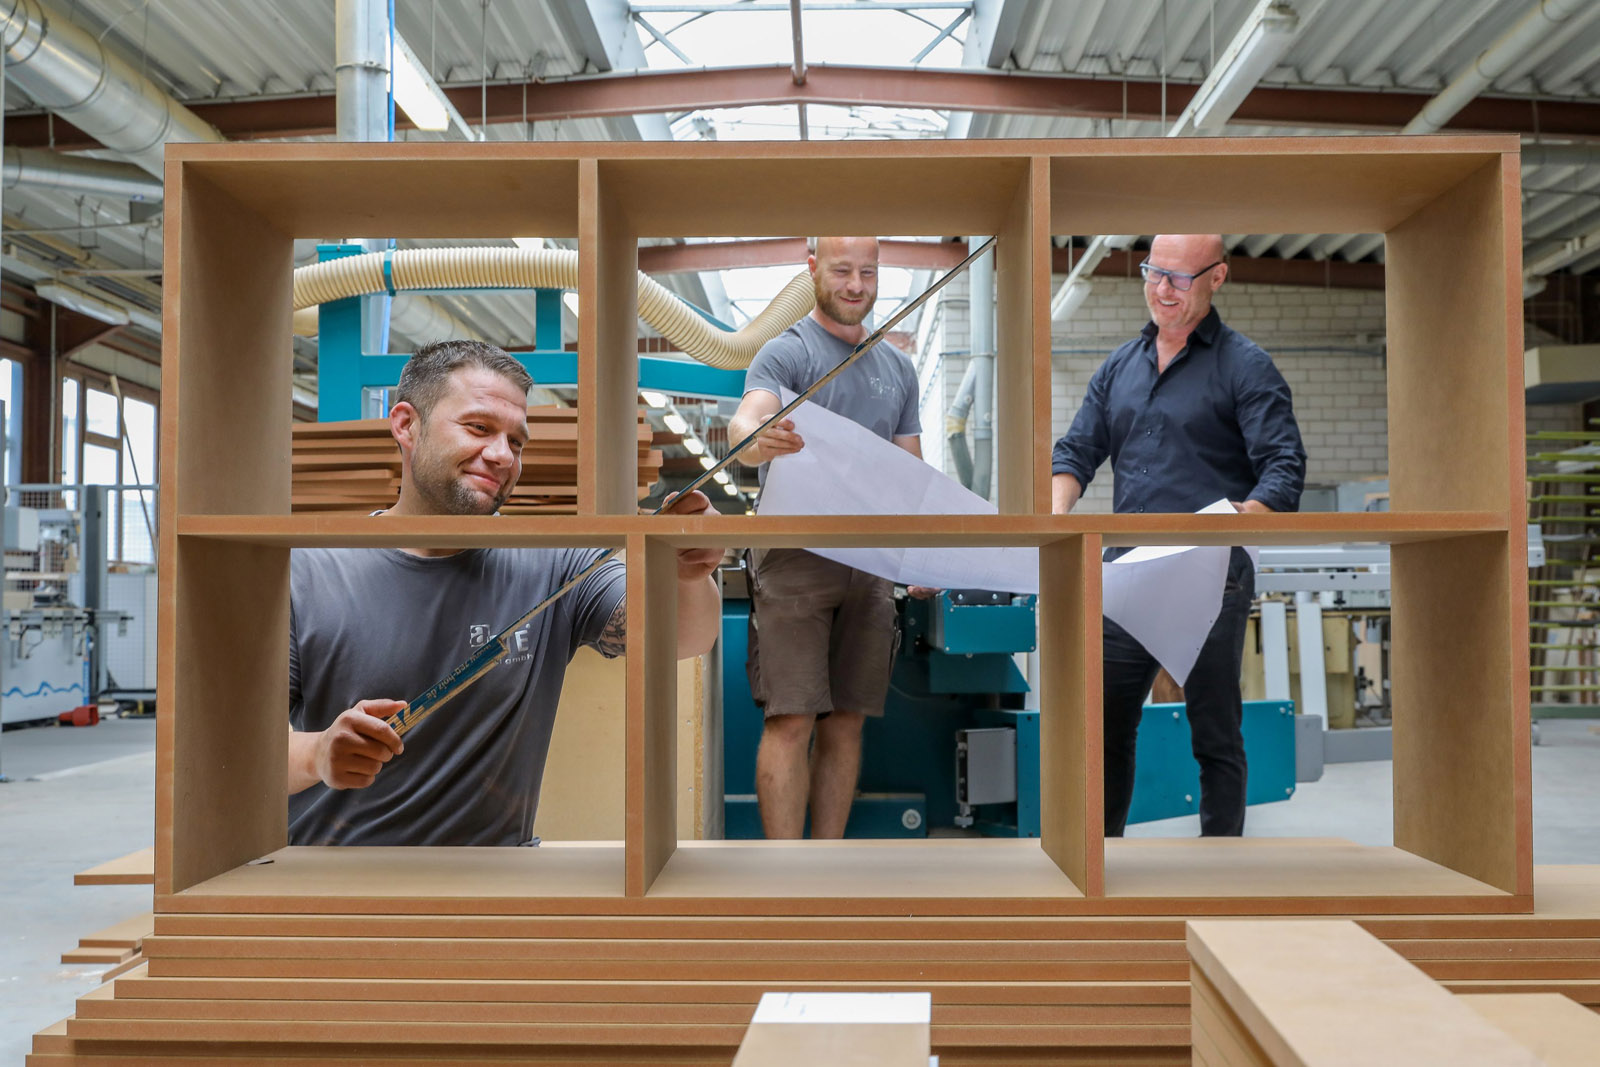 New business models. Thanks to this system, project partner aRTE Möbel GmbH hopes to offer fully sustainable furniture in the future, which is made out of wood and with electricity that is certified to have been produced ecologically.